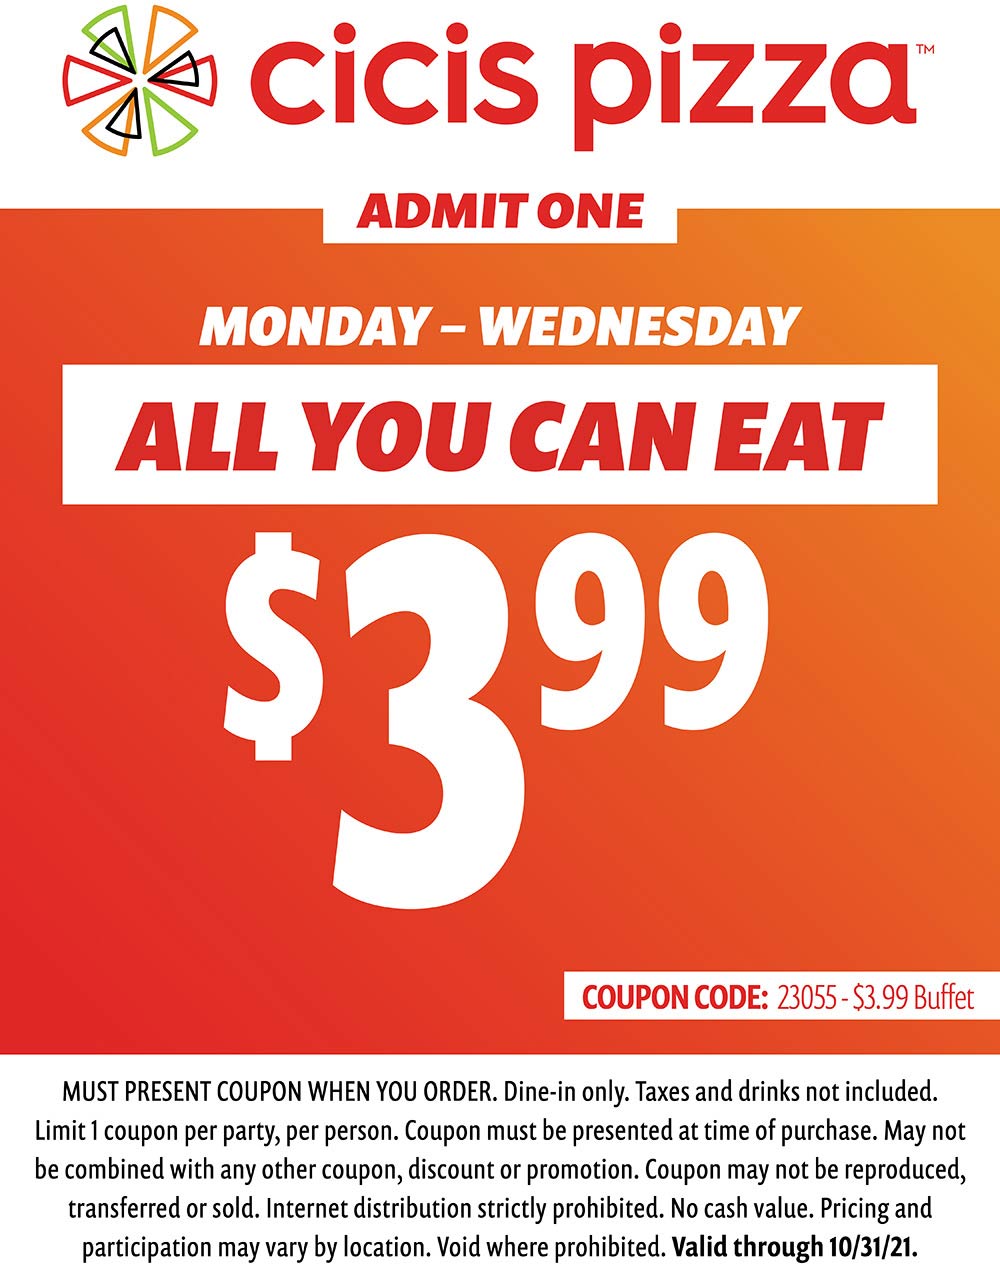 Cicis Pizza restaurants Coupon  Bottomless pizza for $4 Mon-Wed at Cicis Pizza #cicispizza 